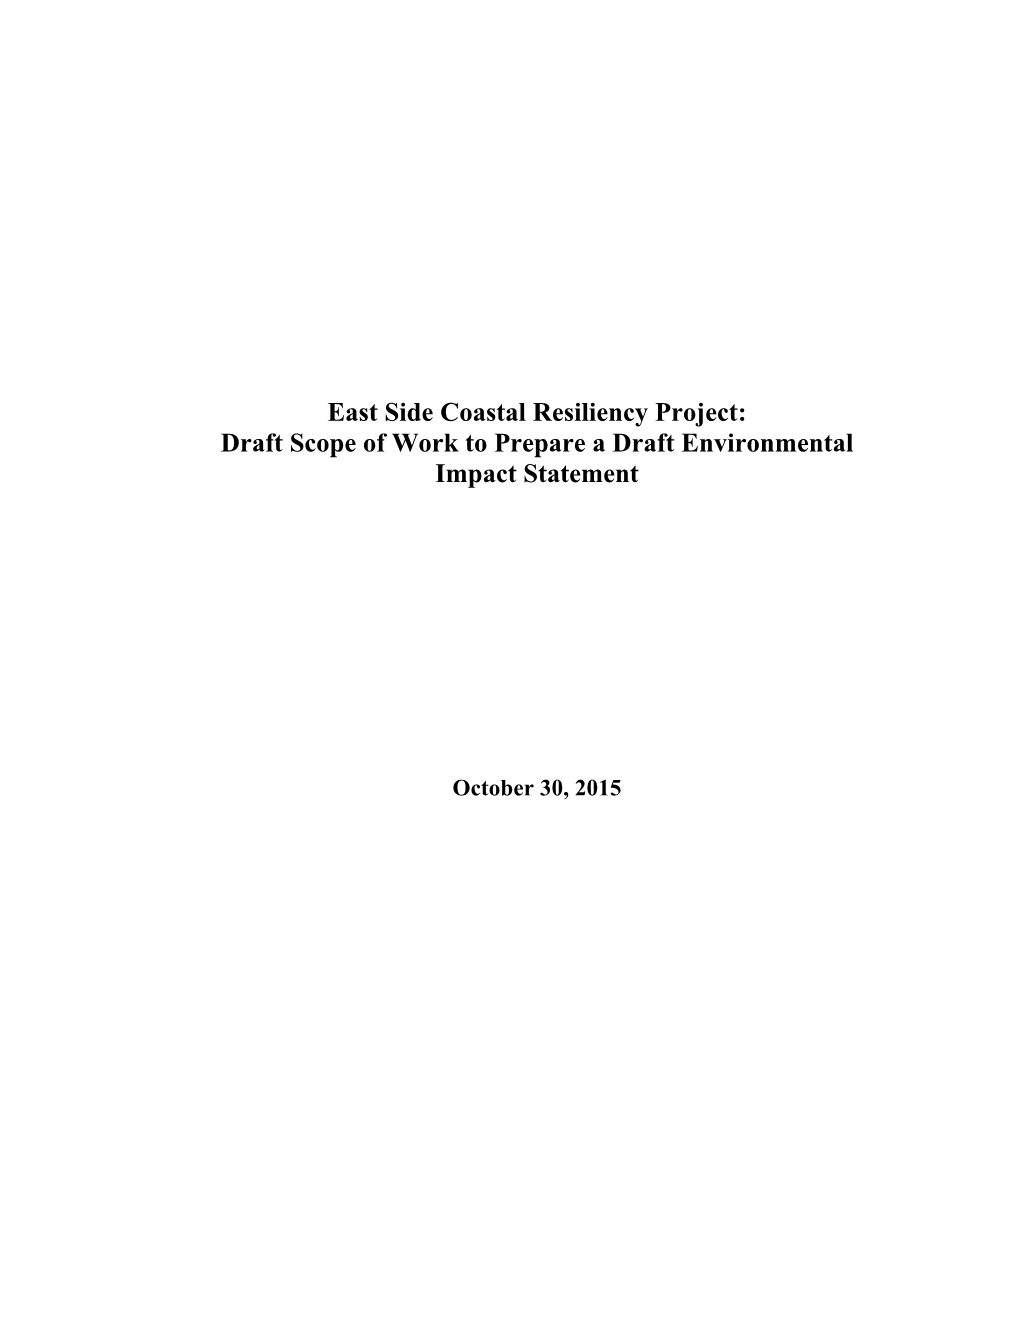 East Side Coastal Resiliency Project: Draft Scope of Work to Prepare a Draft Environmental Impact Statement